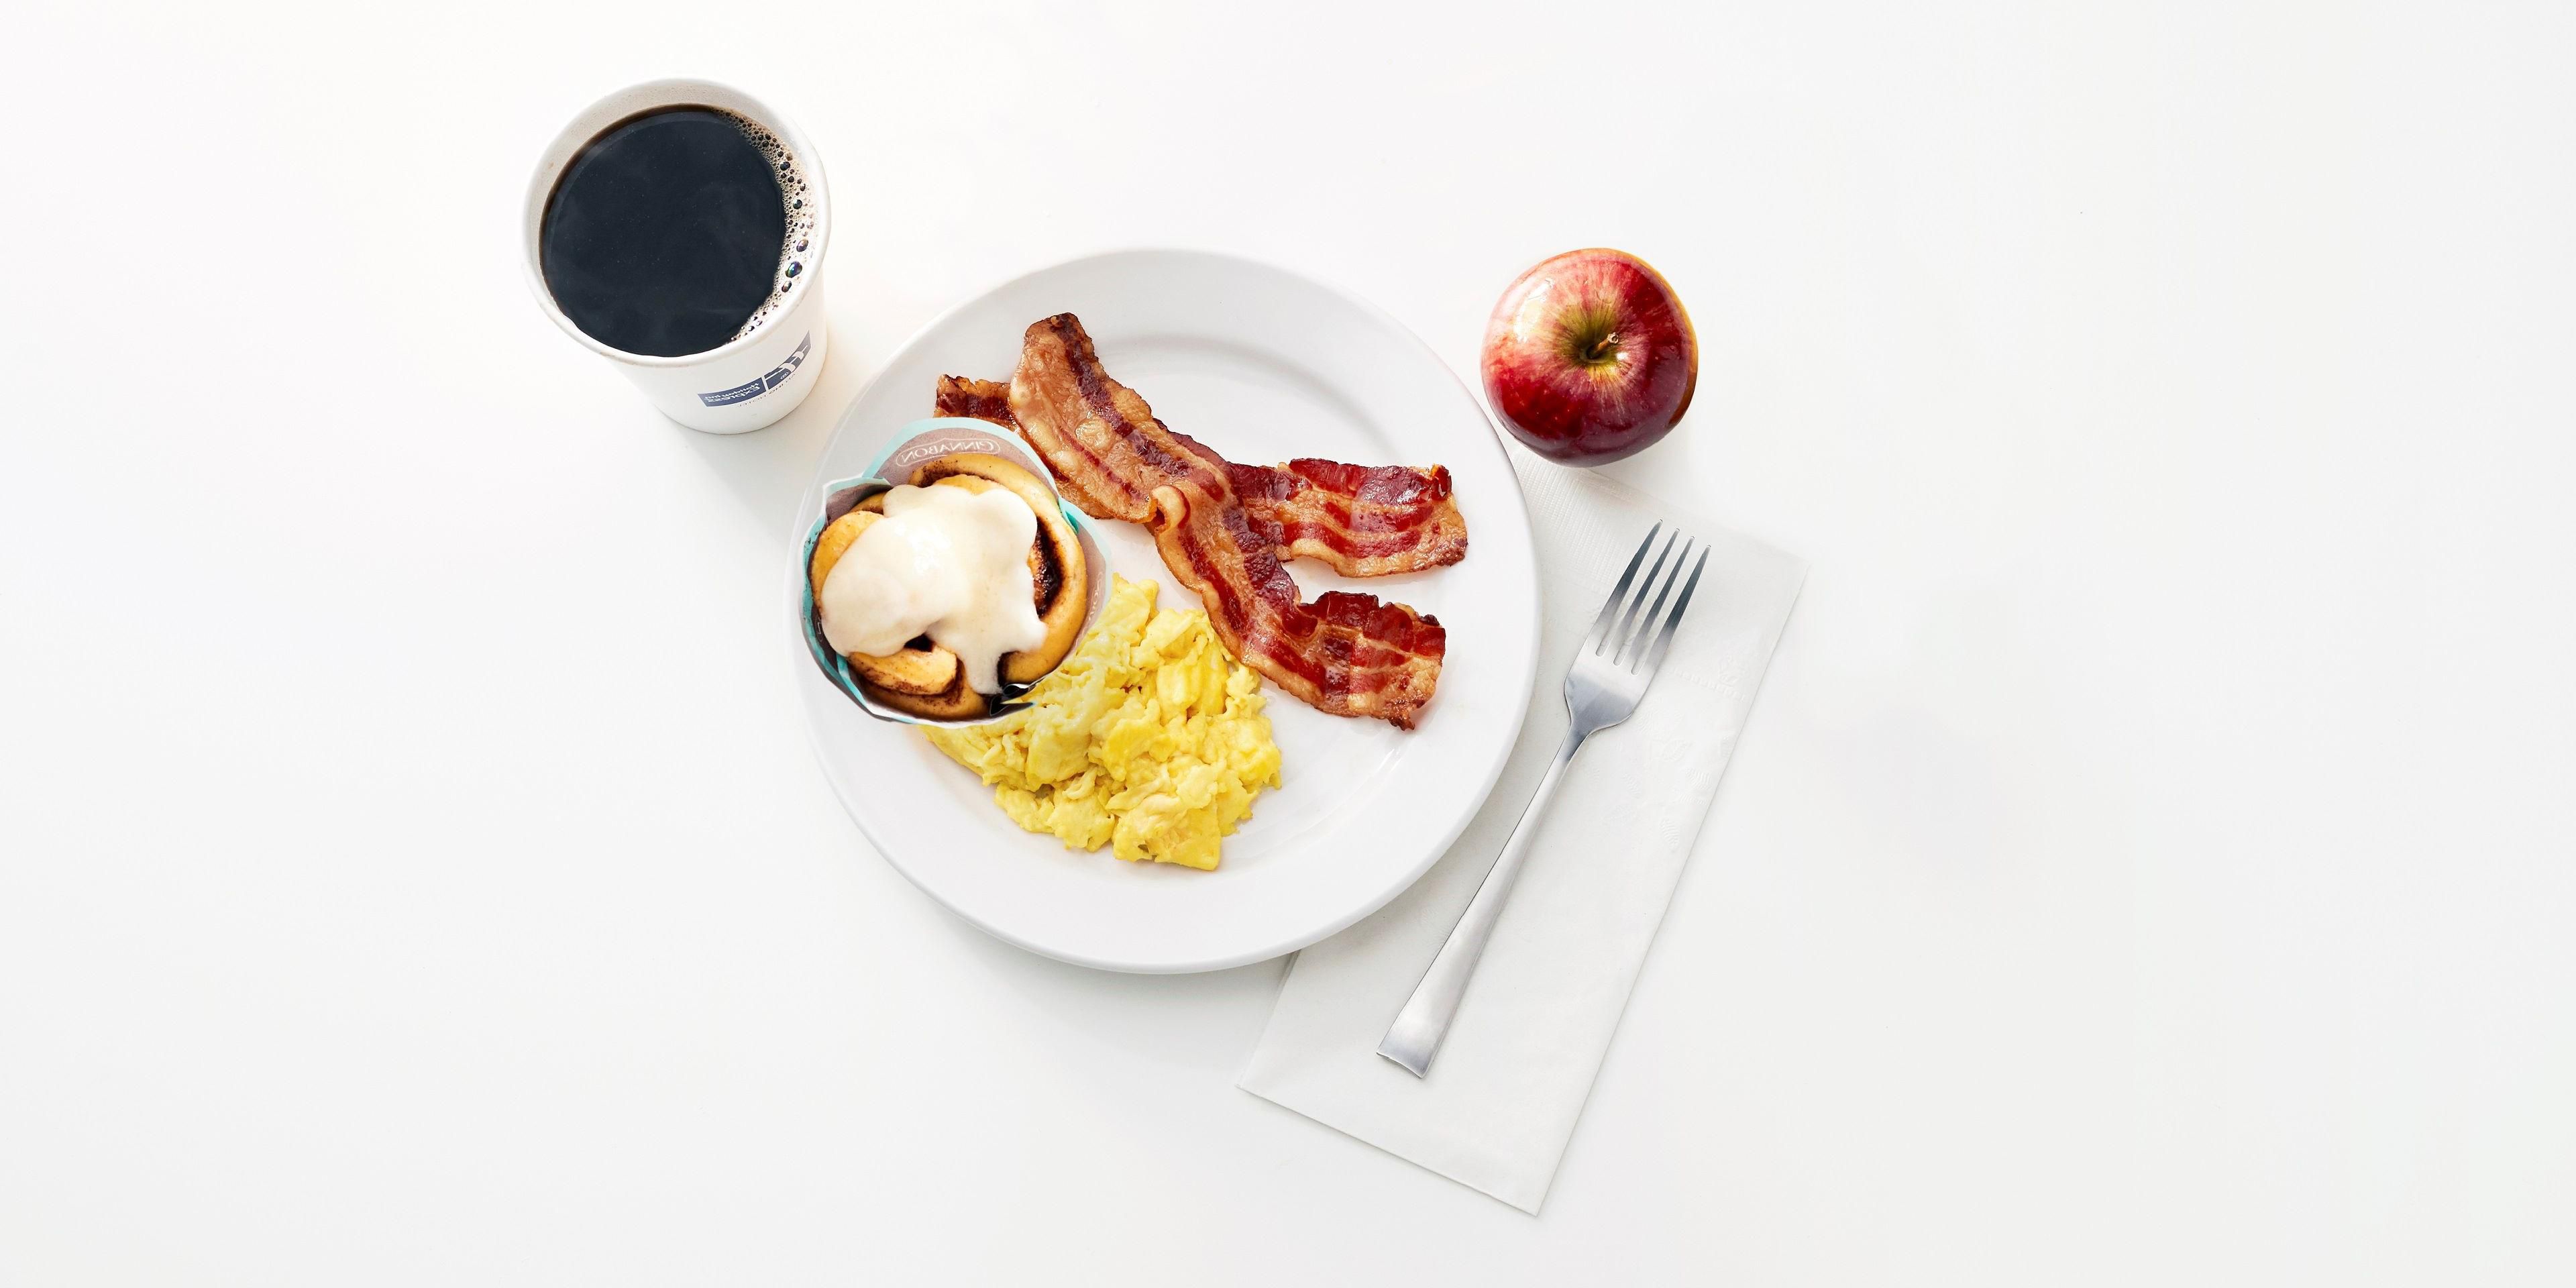 Kick start your day with our Express Start Breakfast with grab ‘n’ go options and favorites such as eggs and bacon, hot pancakes, our signature cinnamon rolls and fresh coffee. Offered from 6:30 AM - 9:30 AM.